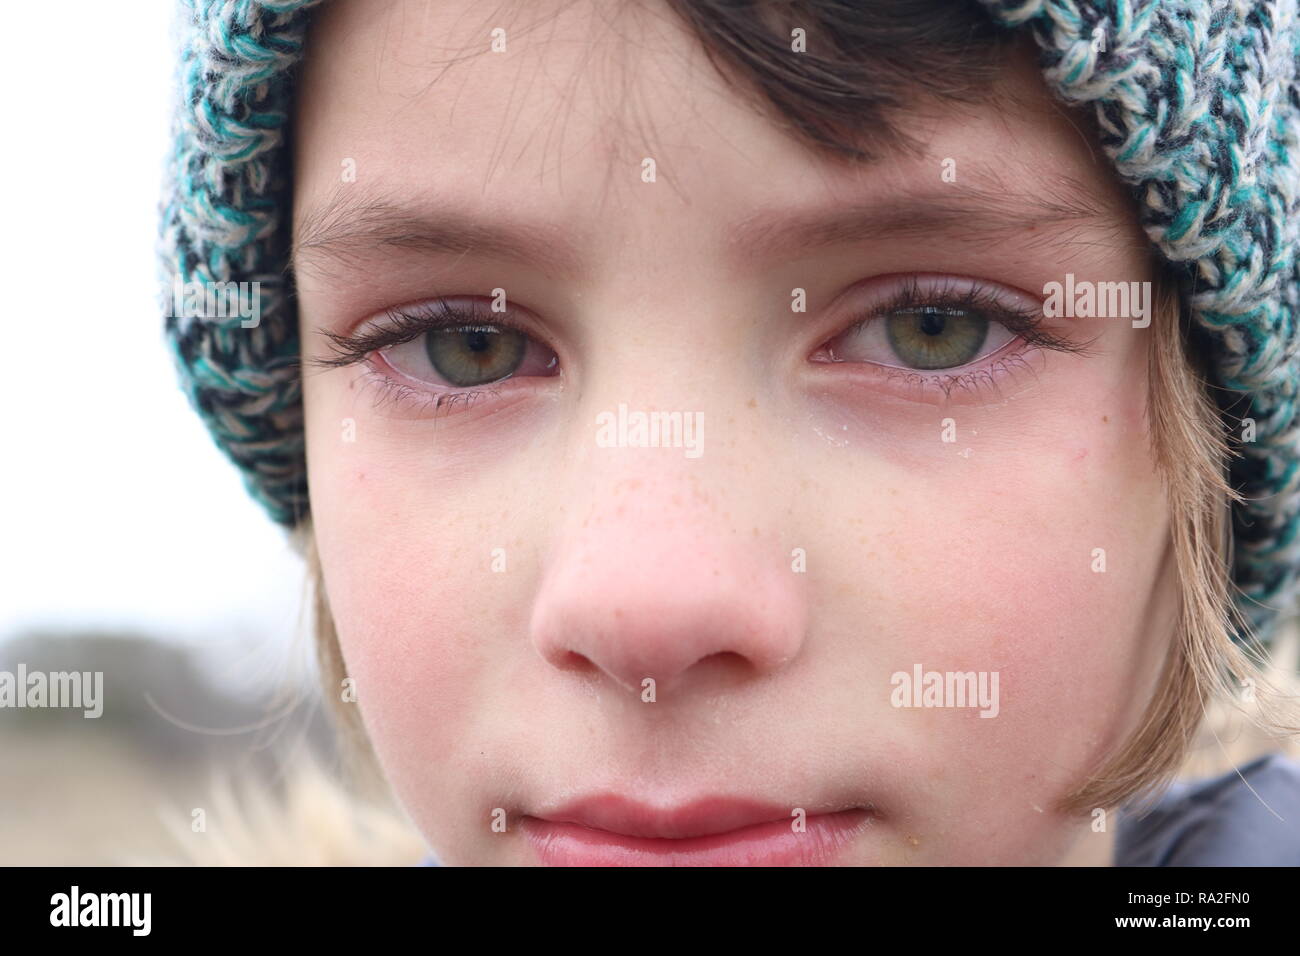 Closeup of a frustrated green eyed little girl that is close to tears Stock Photo